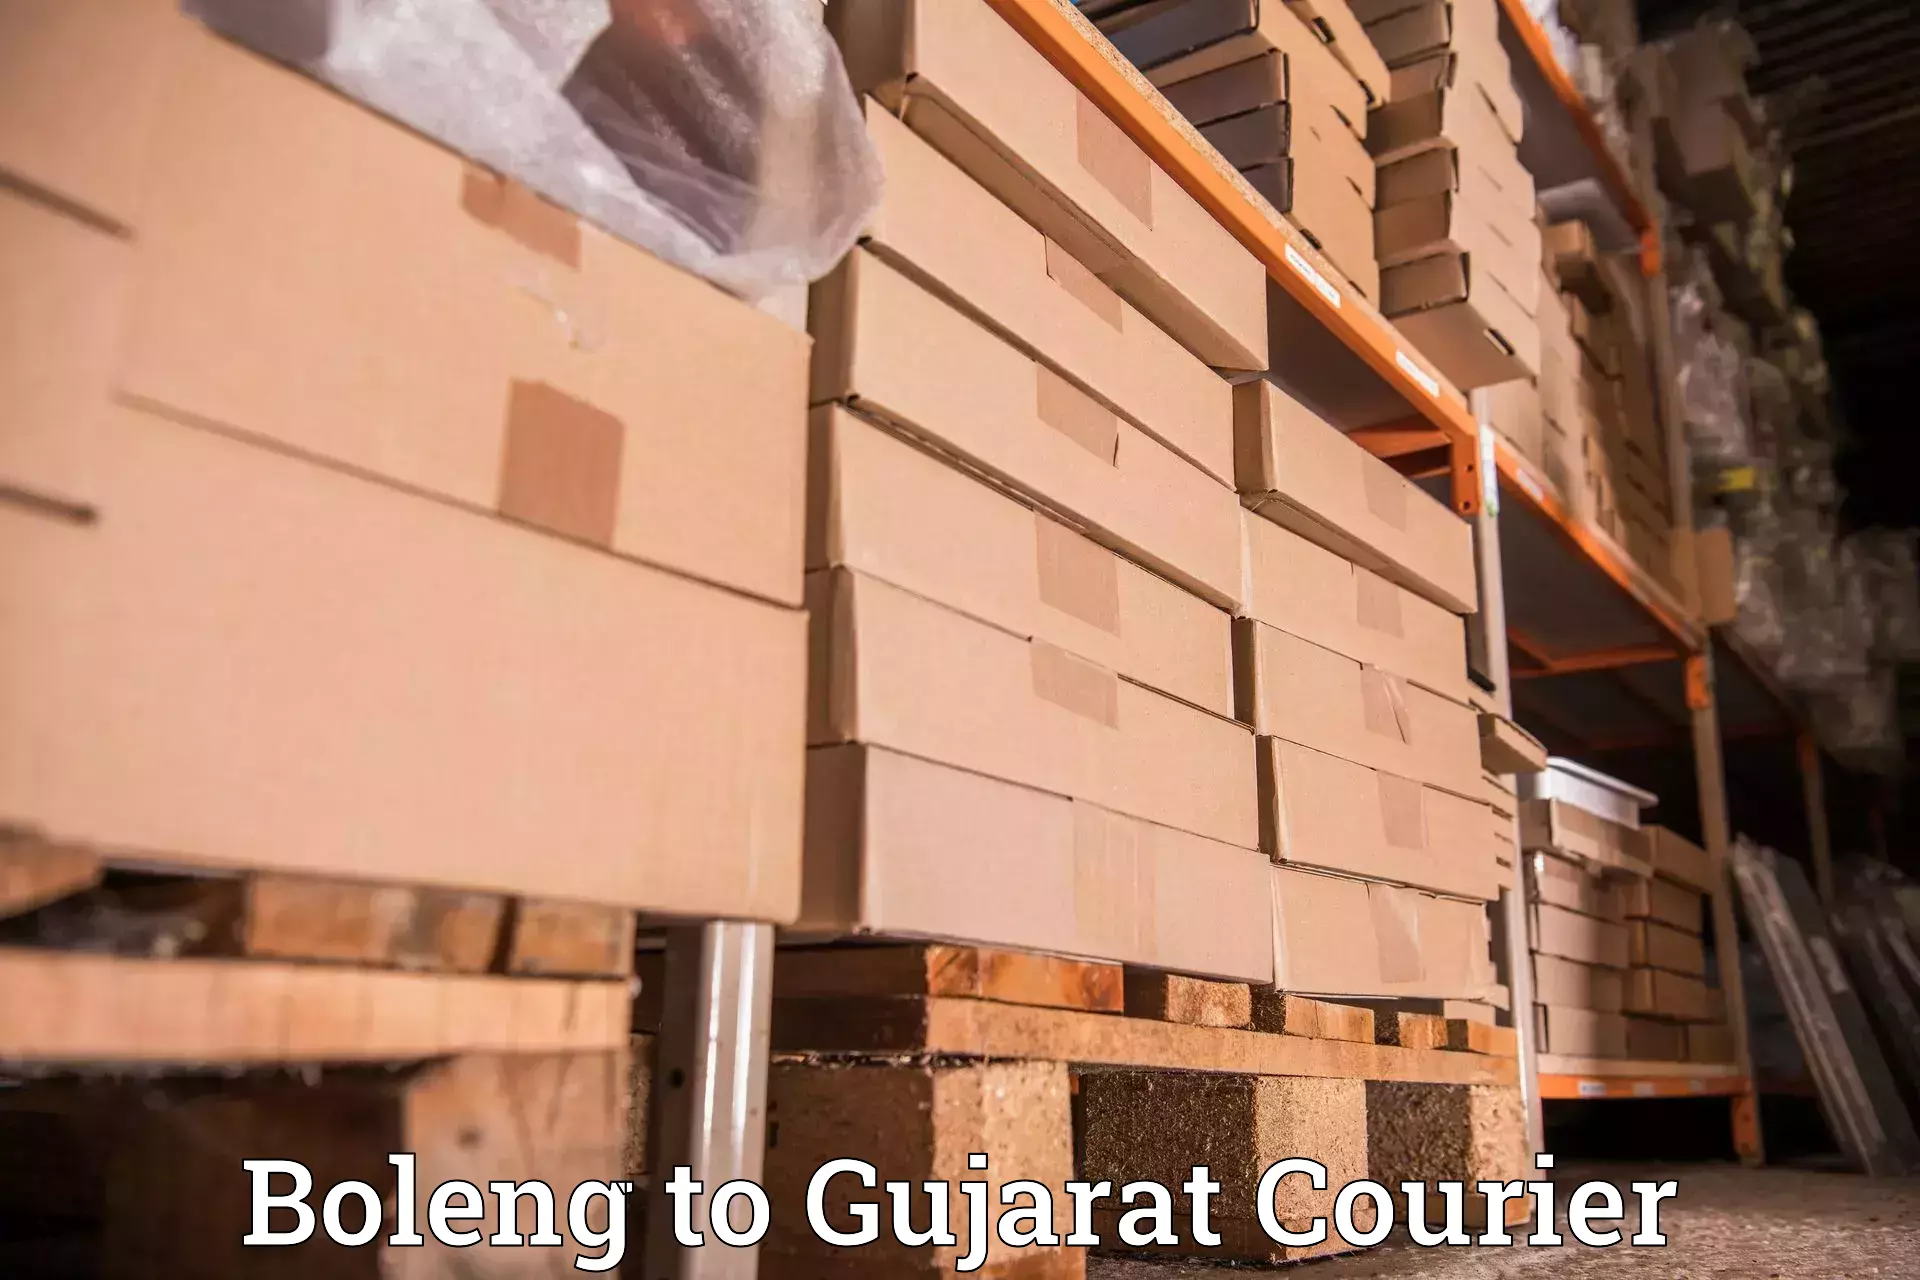 Express delivery network Boleng to Gujarat